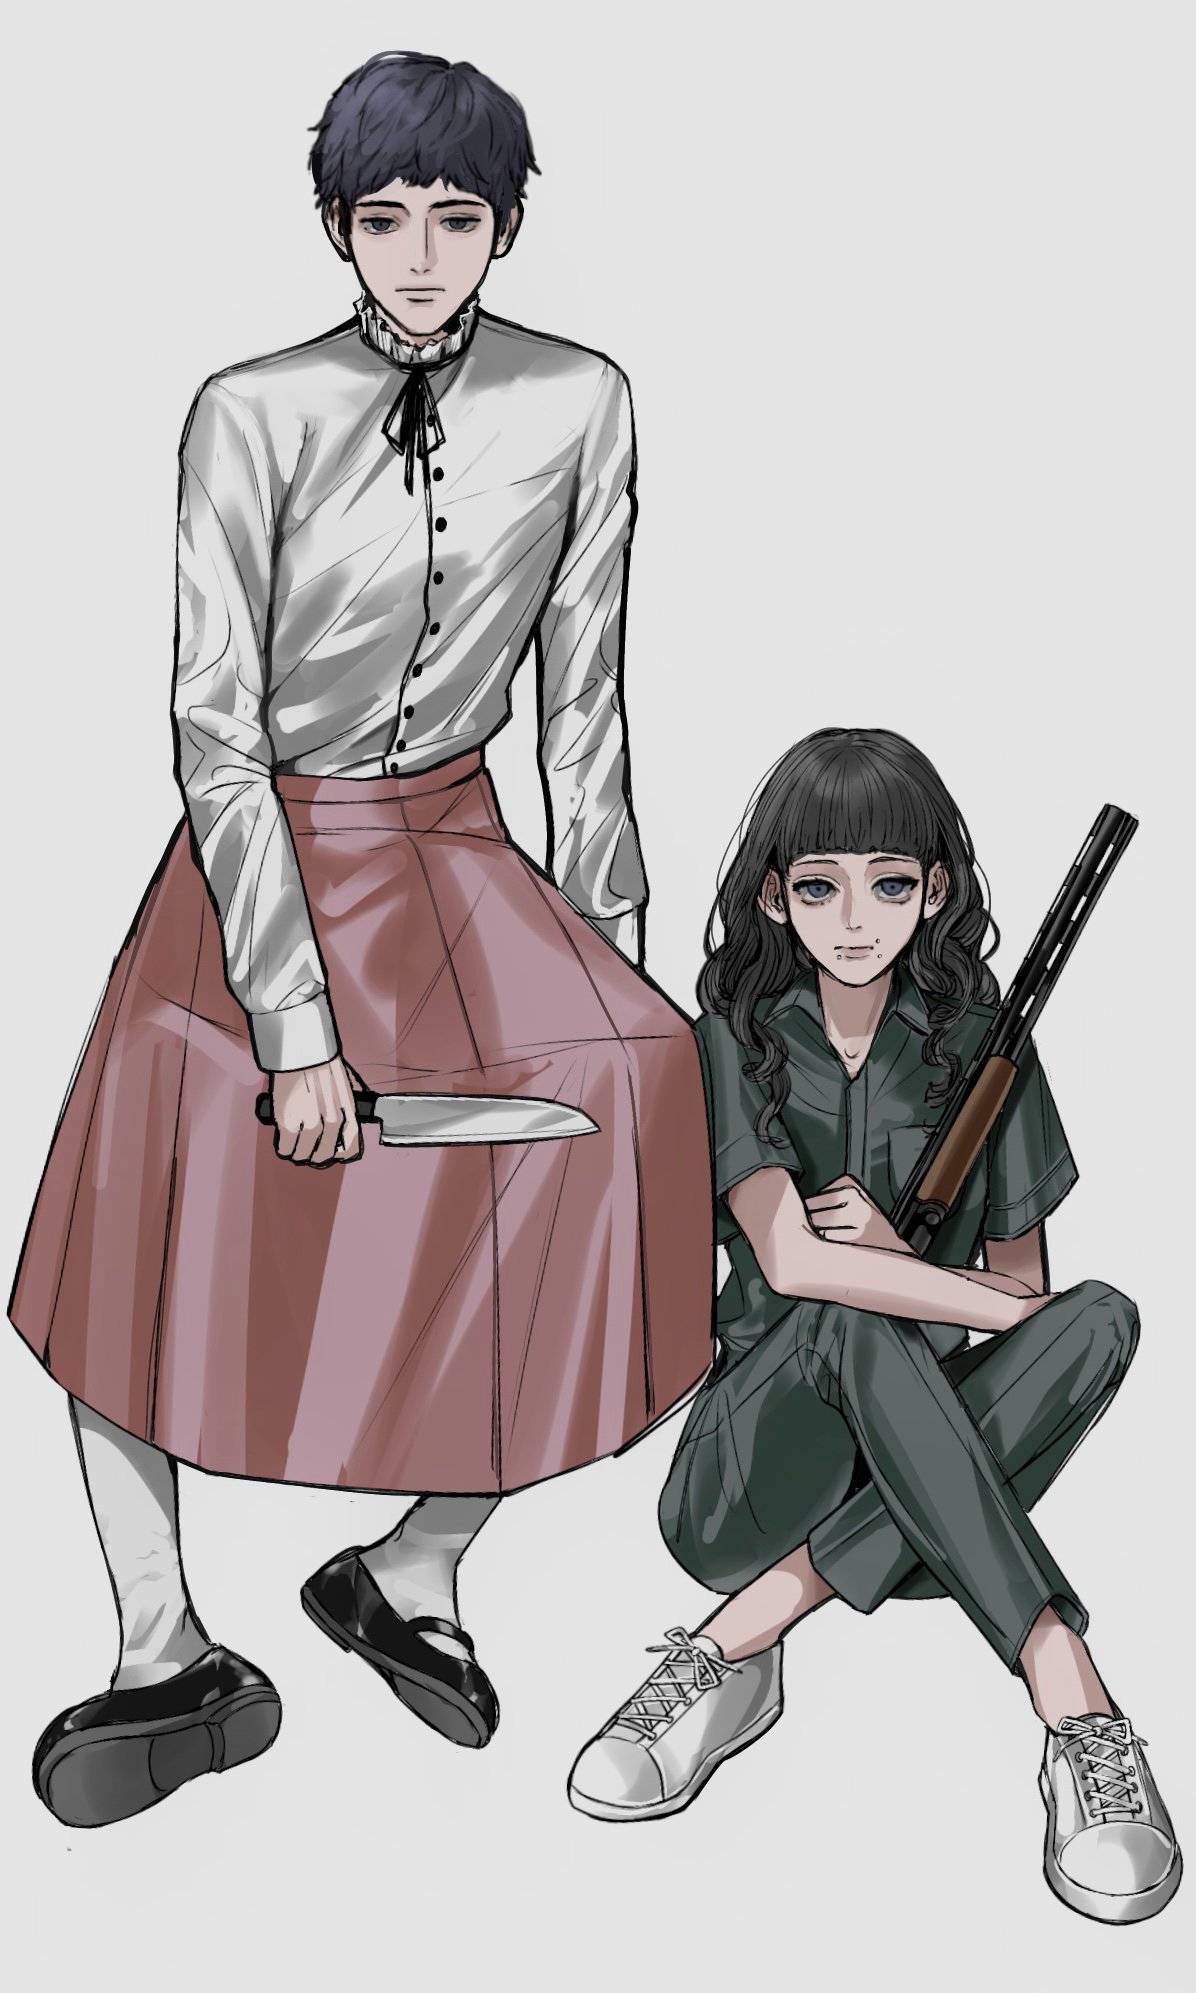 1boy 1girl amikoiiko black_footwear black_hair black_ribbon brown_hair cosplay costume_switch crossdressing crossed_legs fear_&amp;_hunger fear_&amp;_hunger_2:_termina frilled_shirt_collar frills green_jumpsuit gun highres holding holding_gun holding_knife holding_weapon jumpsuit knife levi_(fear_&amp;_hunger) long_hair long_sleeves marina_(fear_&amp;_hunger) mary_janes mouth_piercing pink_skirt ribbon rifle shoes simple_background sitting skirt socks weapon white_background white_footwear